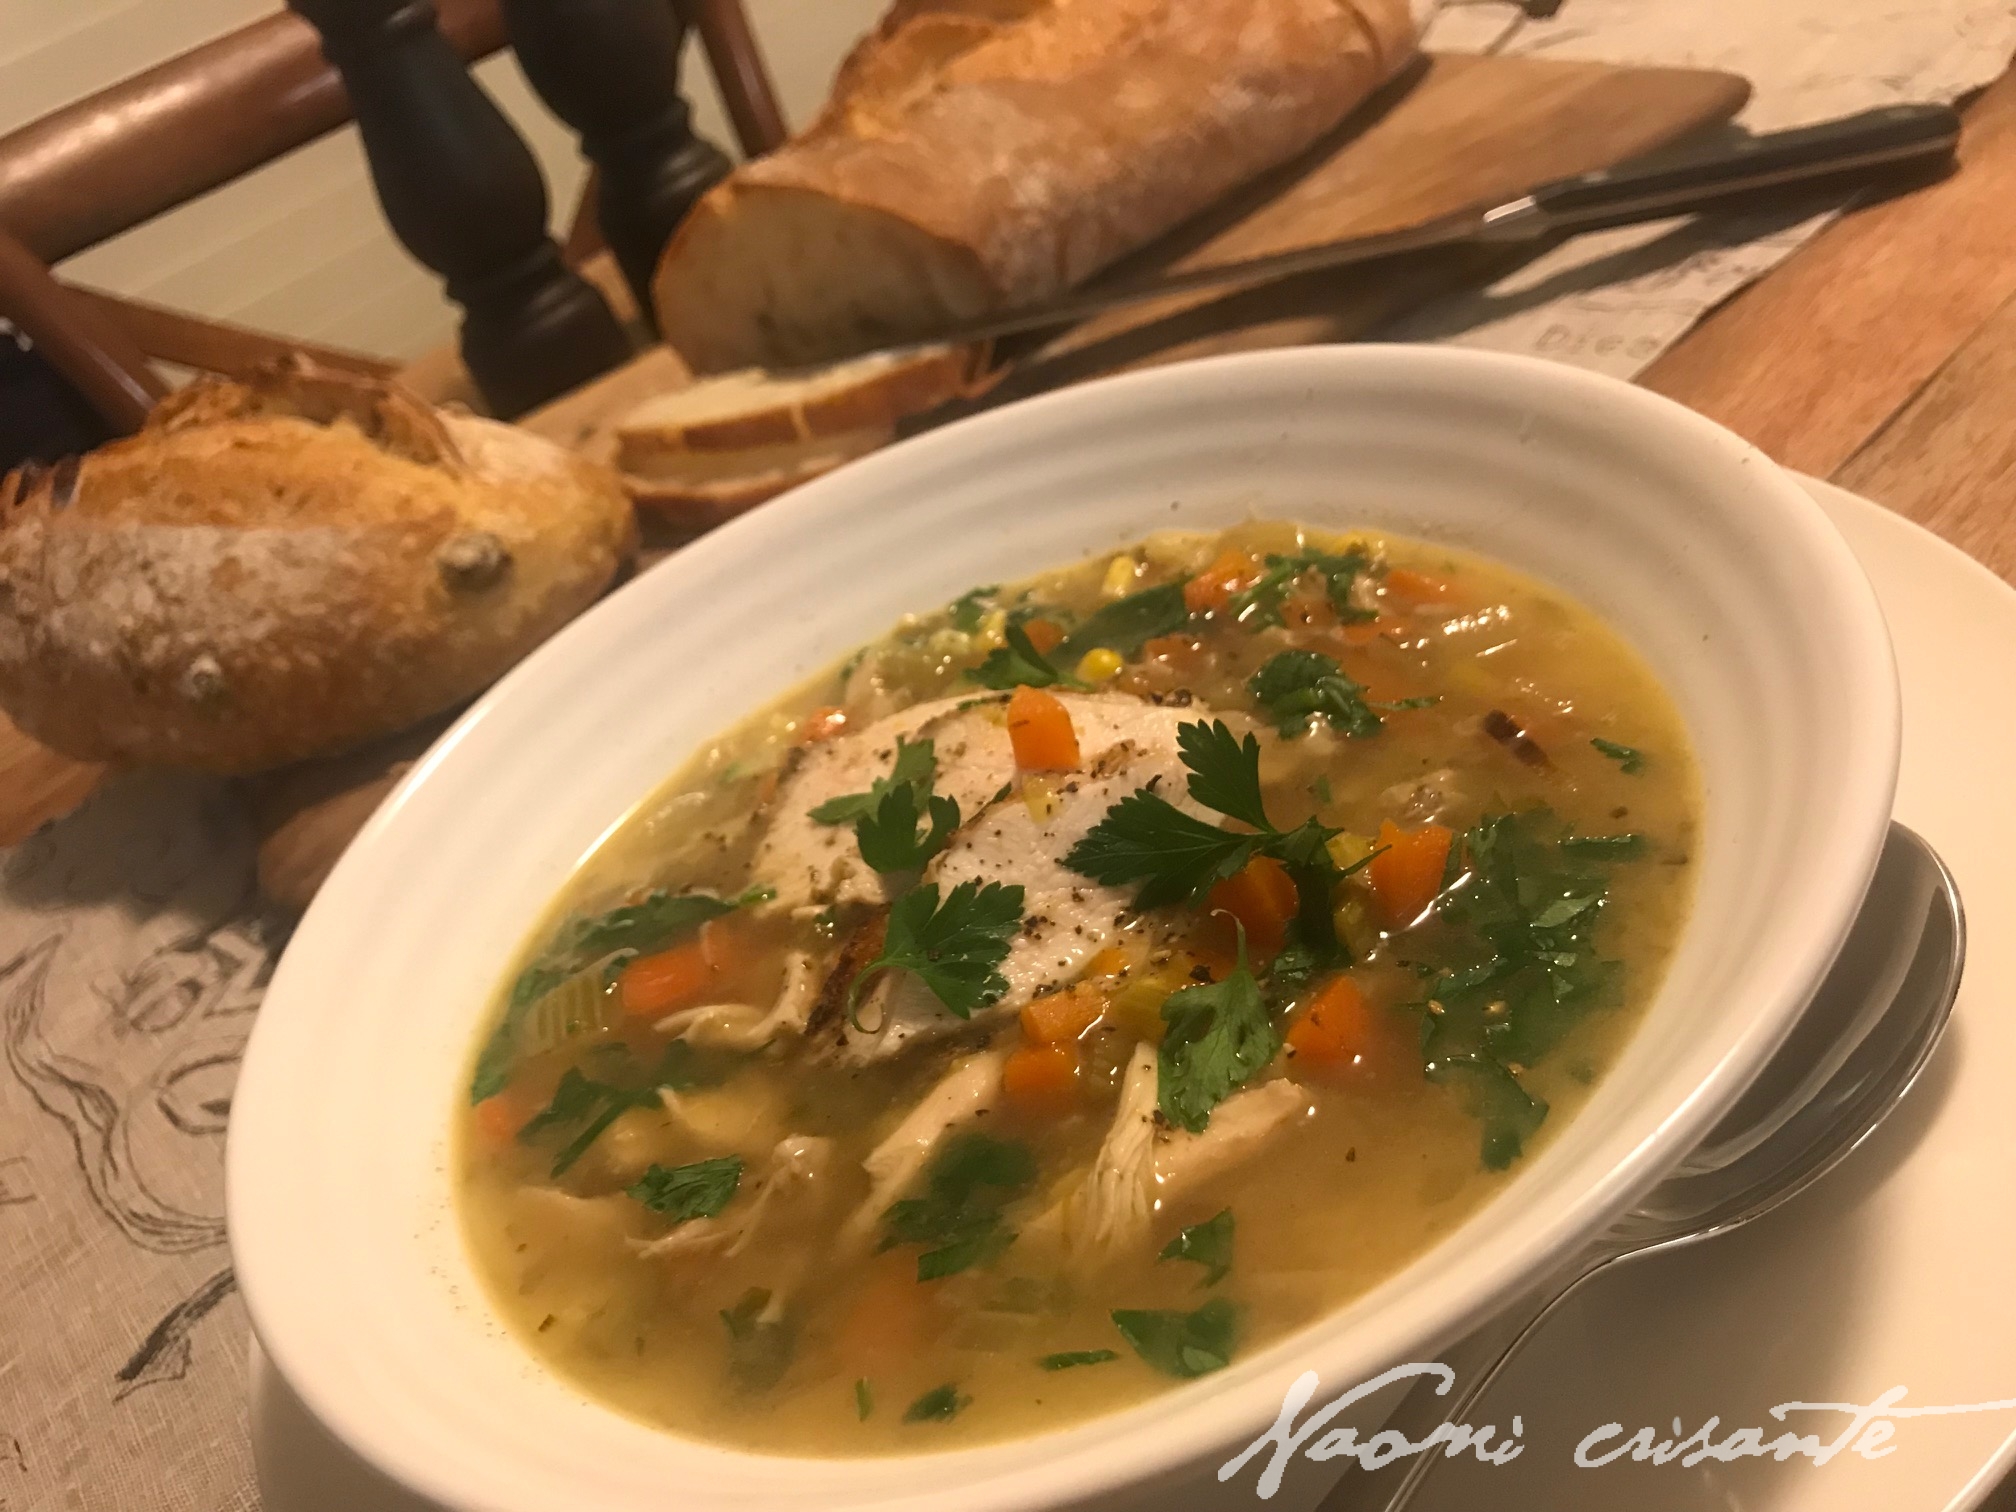 Spring Chicken, Leek and Vegetable Soup